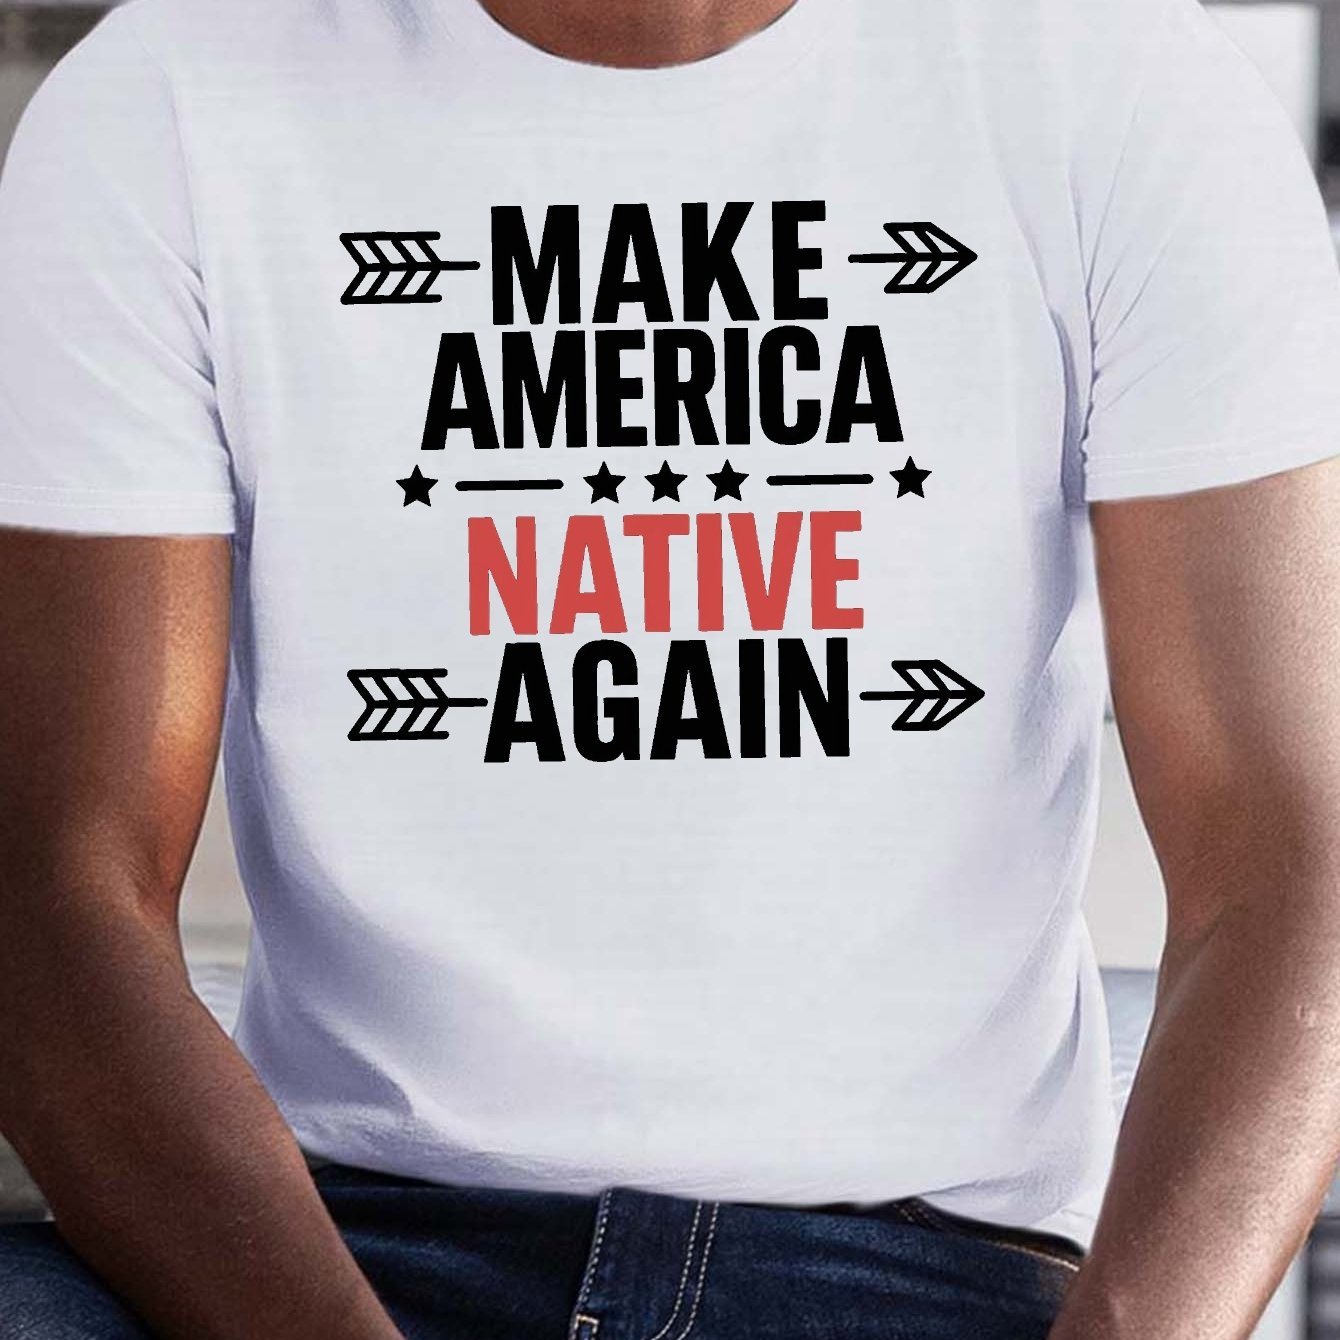 

1 Pc, 100% Cotton T-shirt, Plus Size Men's Summer T-shirt, Make America Native Again Graphic Print Short Sleeve Tees Trend Casual Tops For Daily Life, Big & Tall Guys